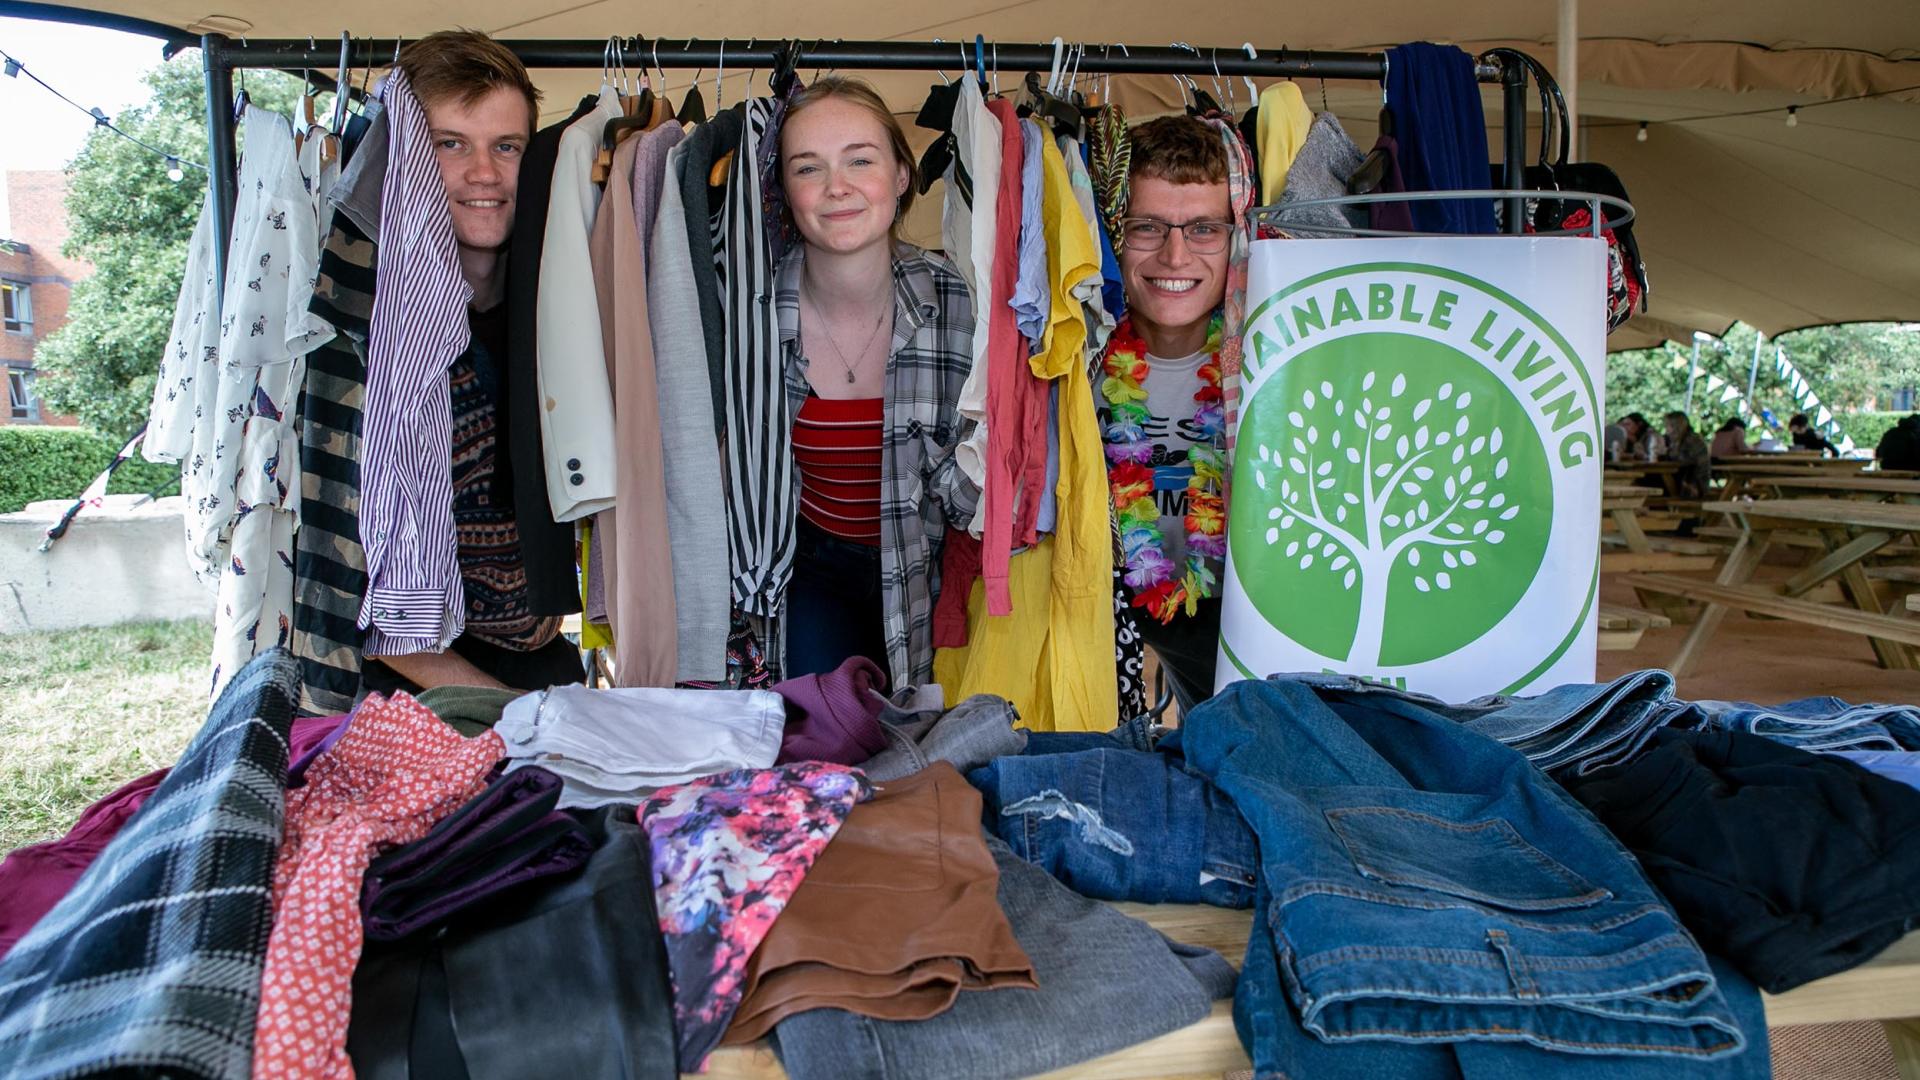 Shows students from DCU's Sustainable Living Society